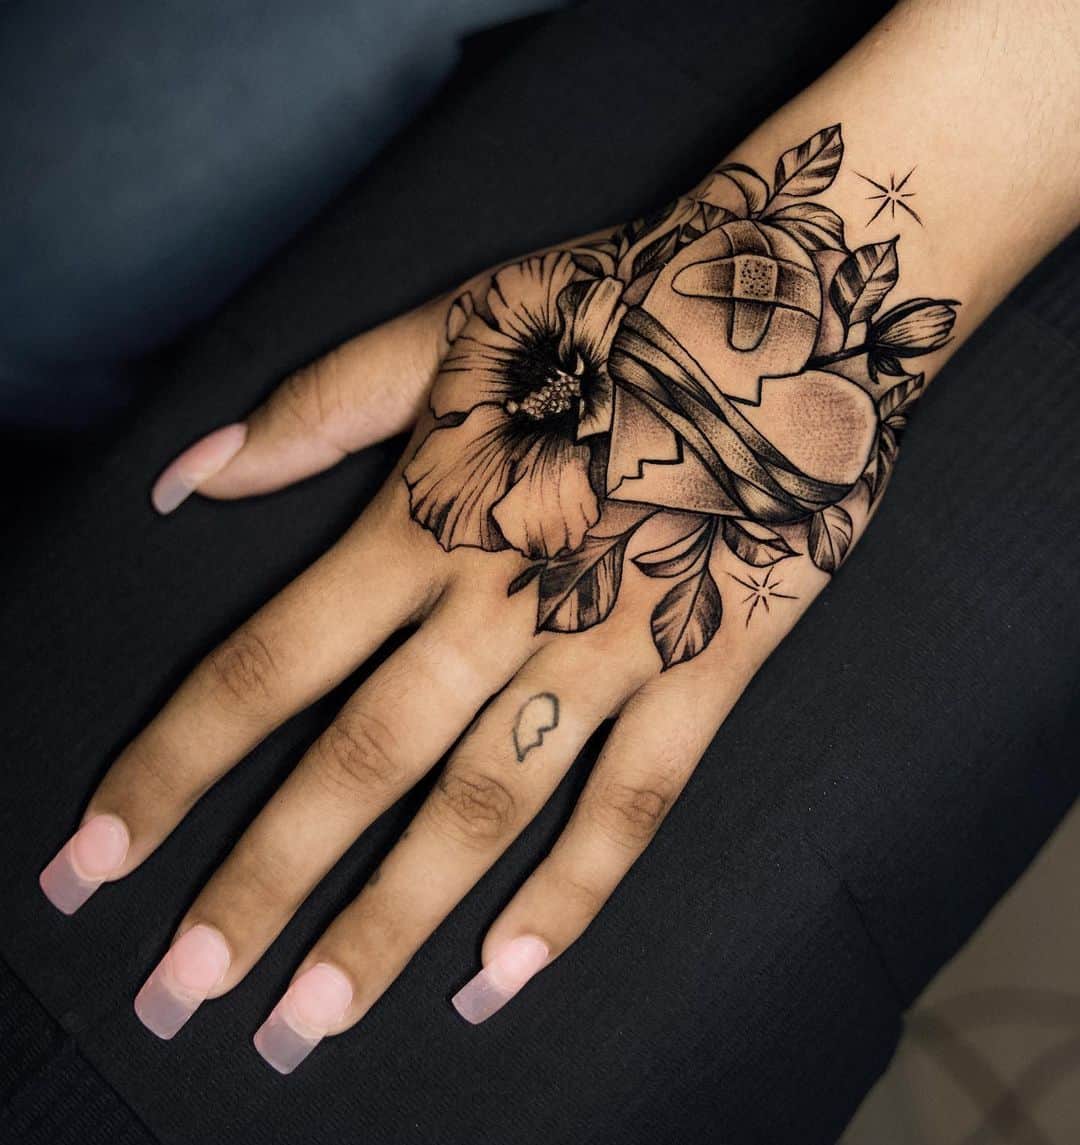 28 Best Heart Tattoo Designs And Ideas For Women